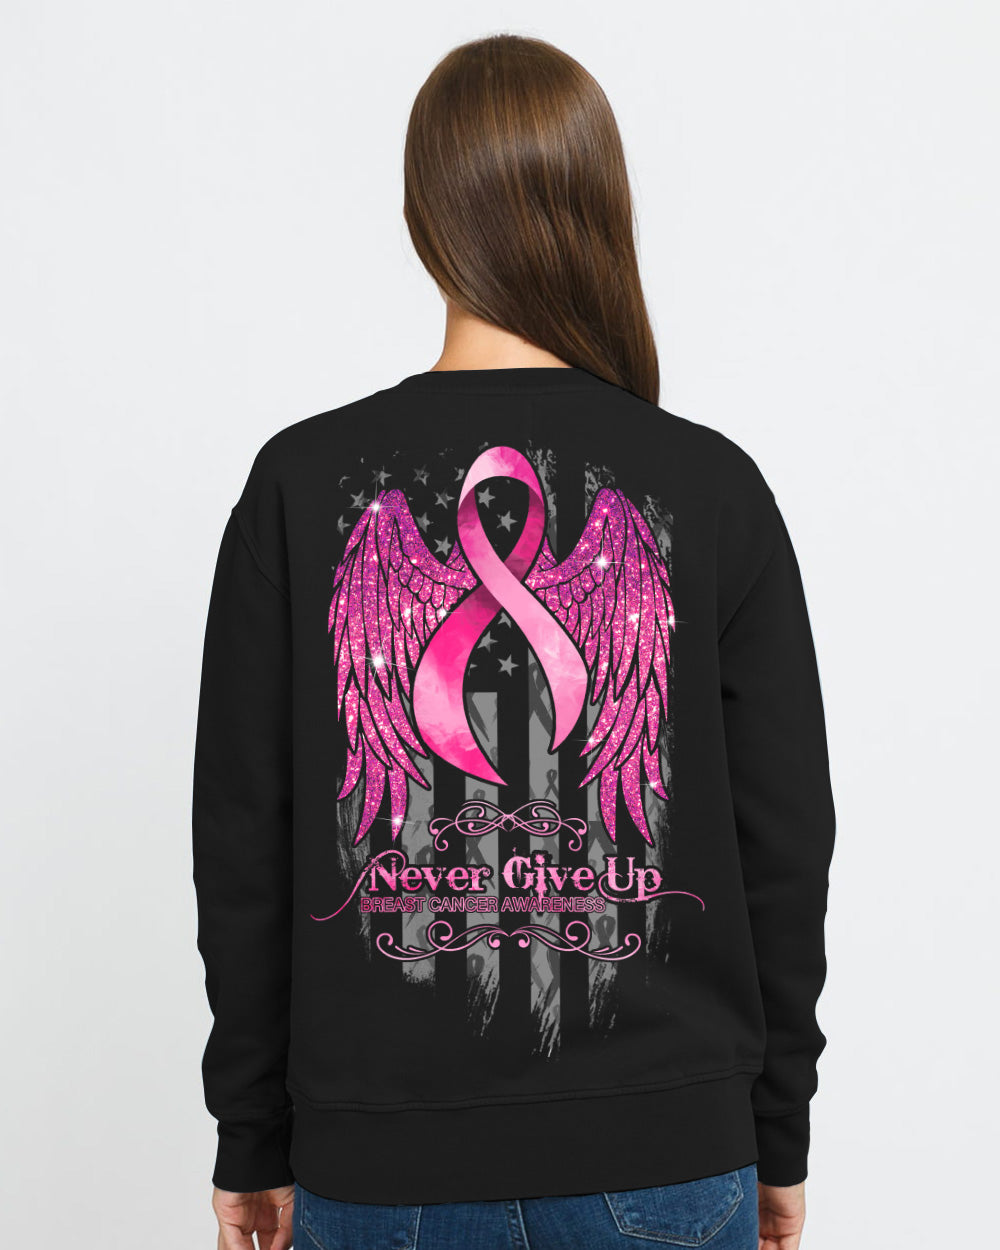 Never Give Up Glitter Wings Ribbon Women's Breast Cancer Awareness Sweatshirt